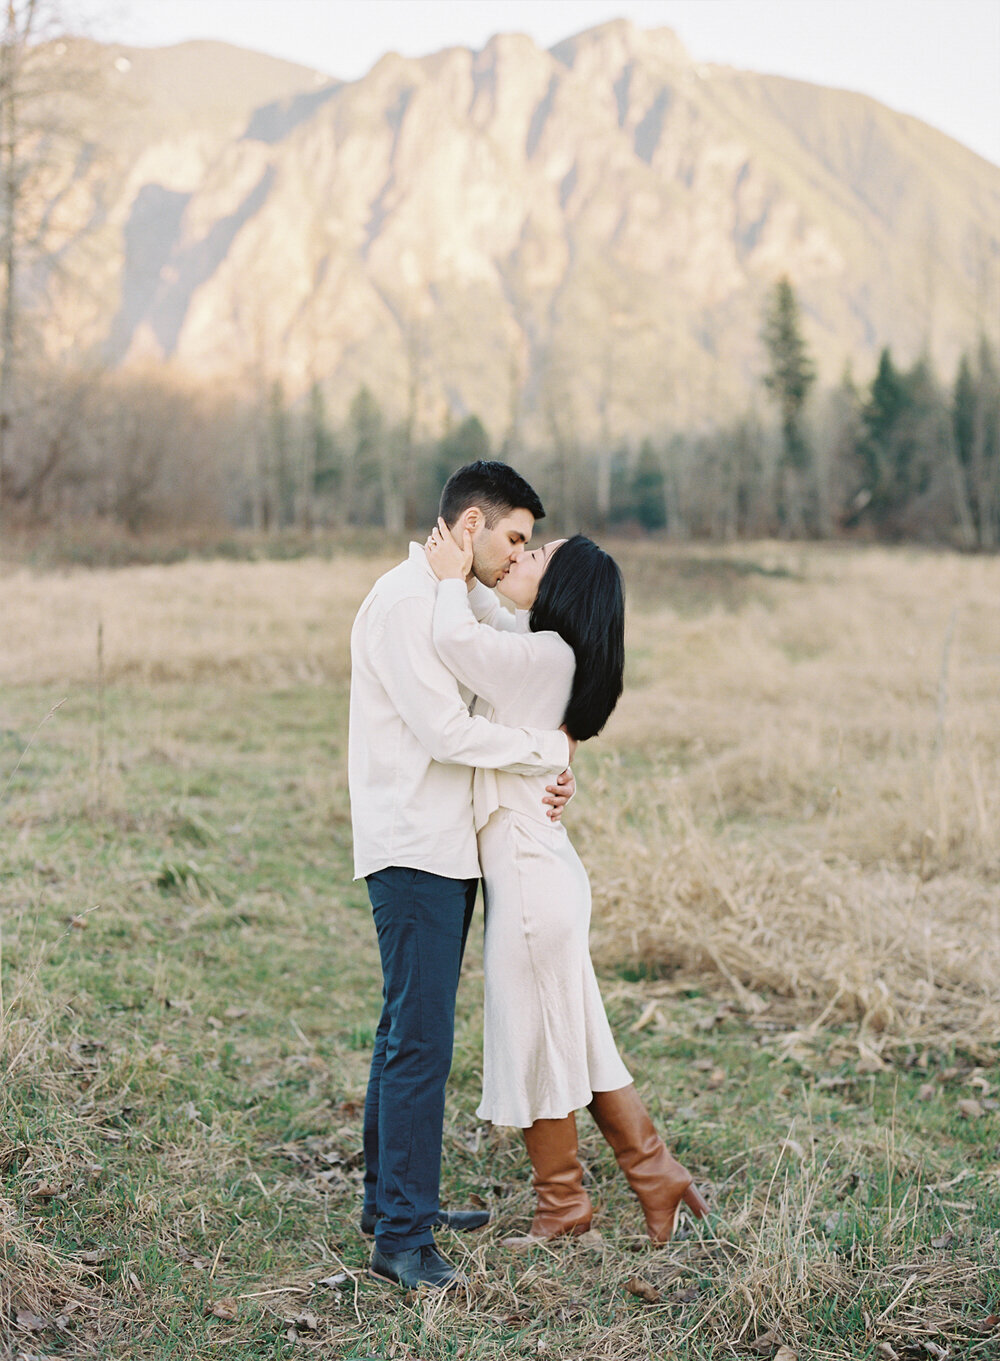 Mountain View Engagement Session on Film in North Bend - Tetiana Photography - C&N - 21